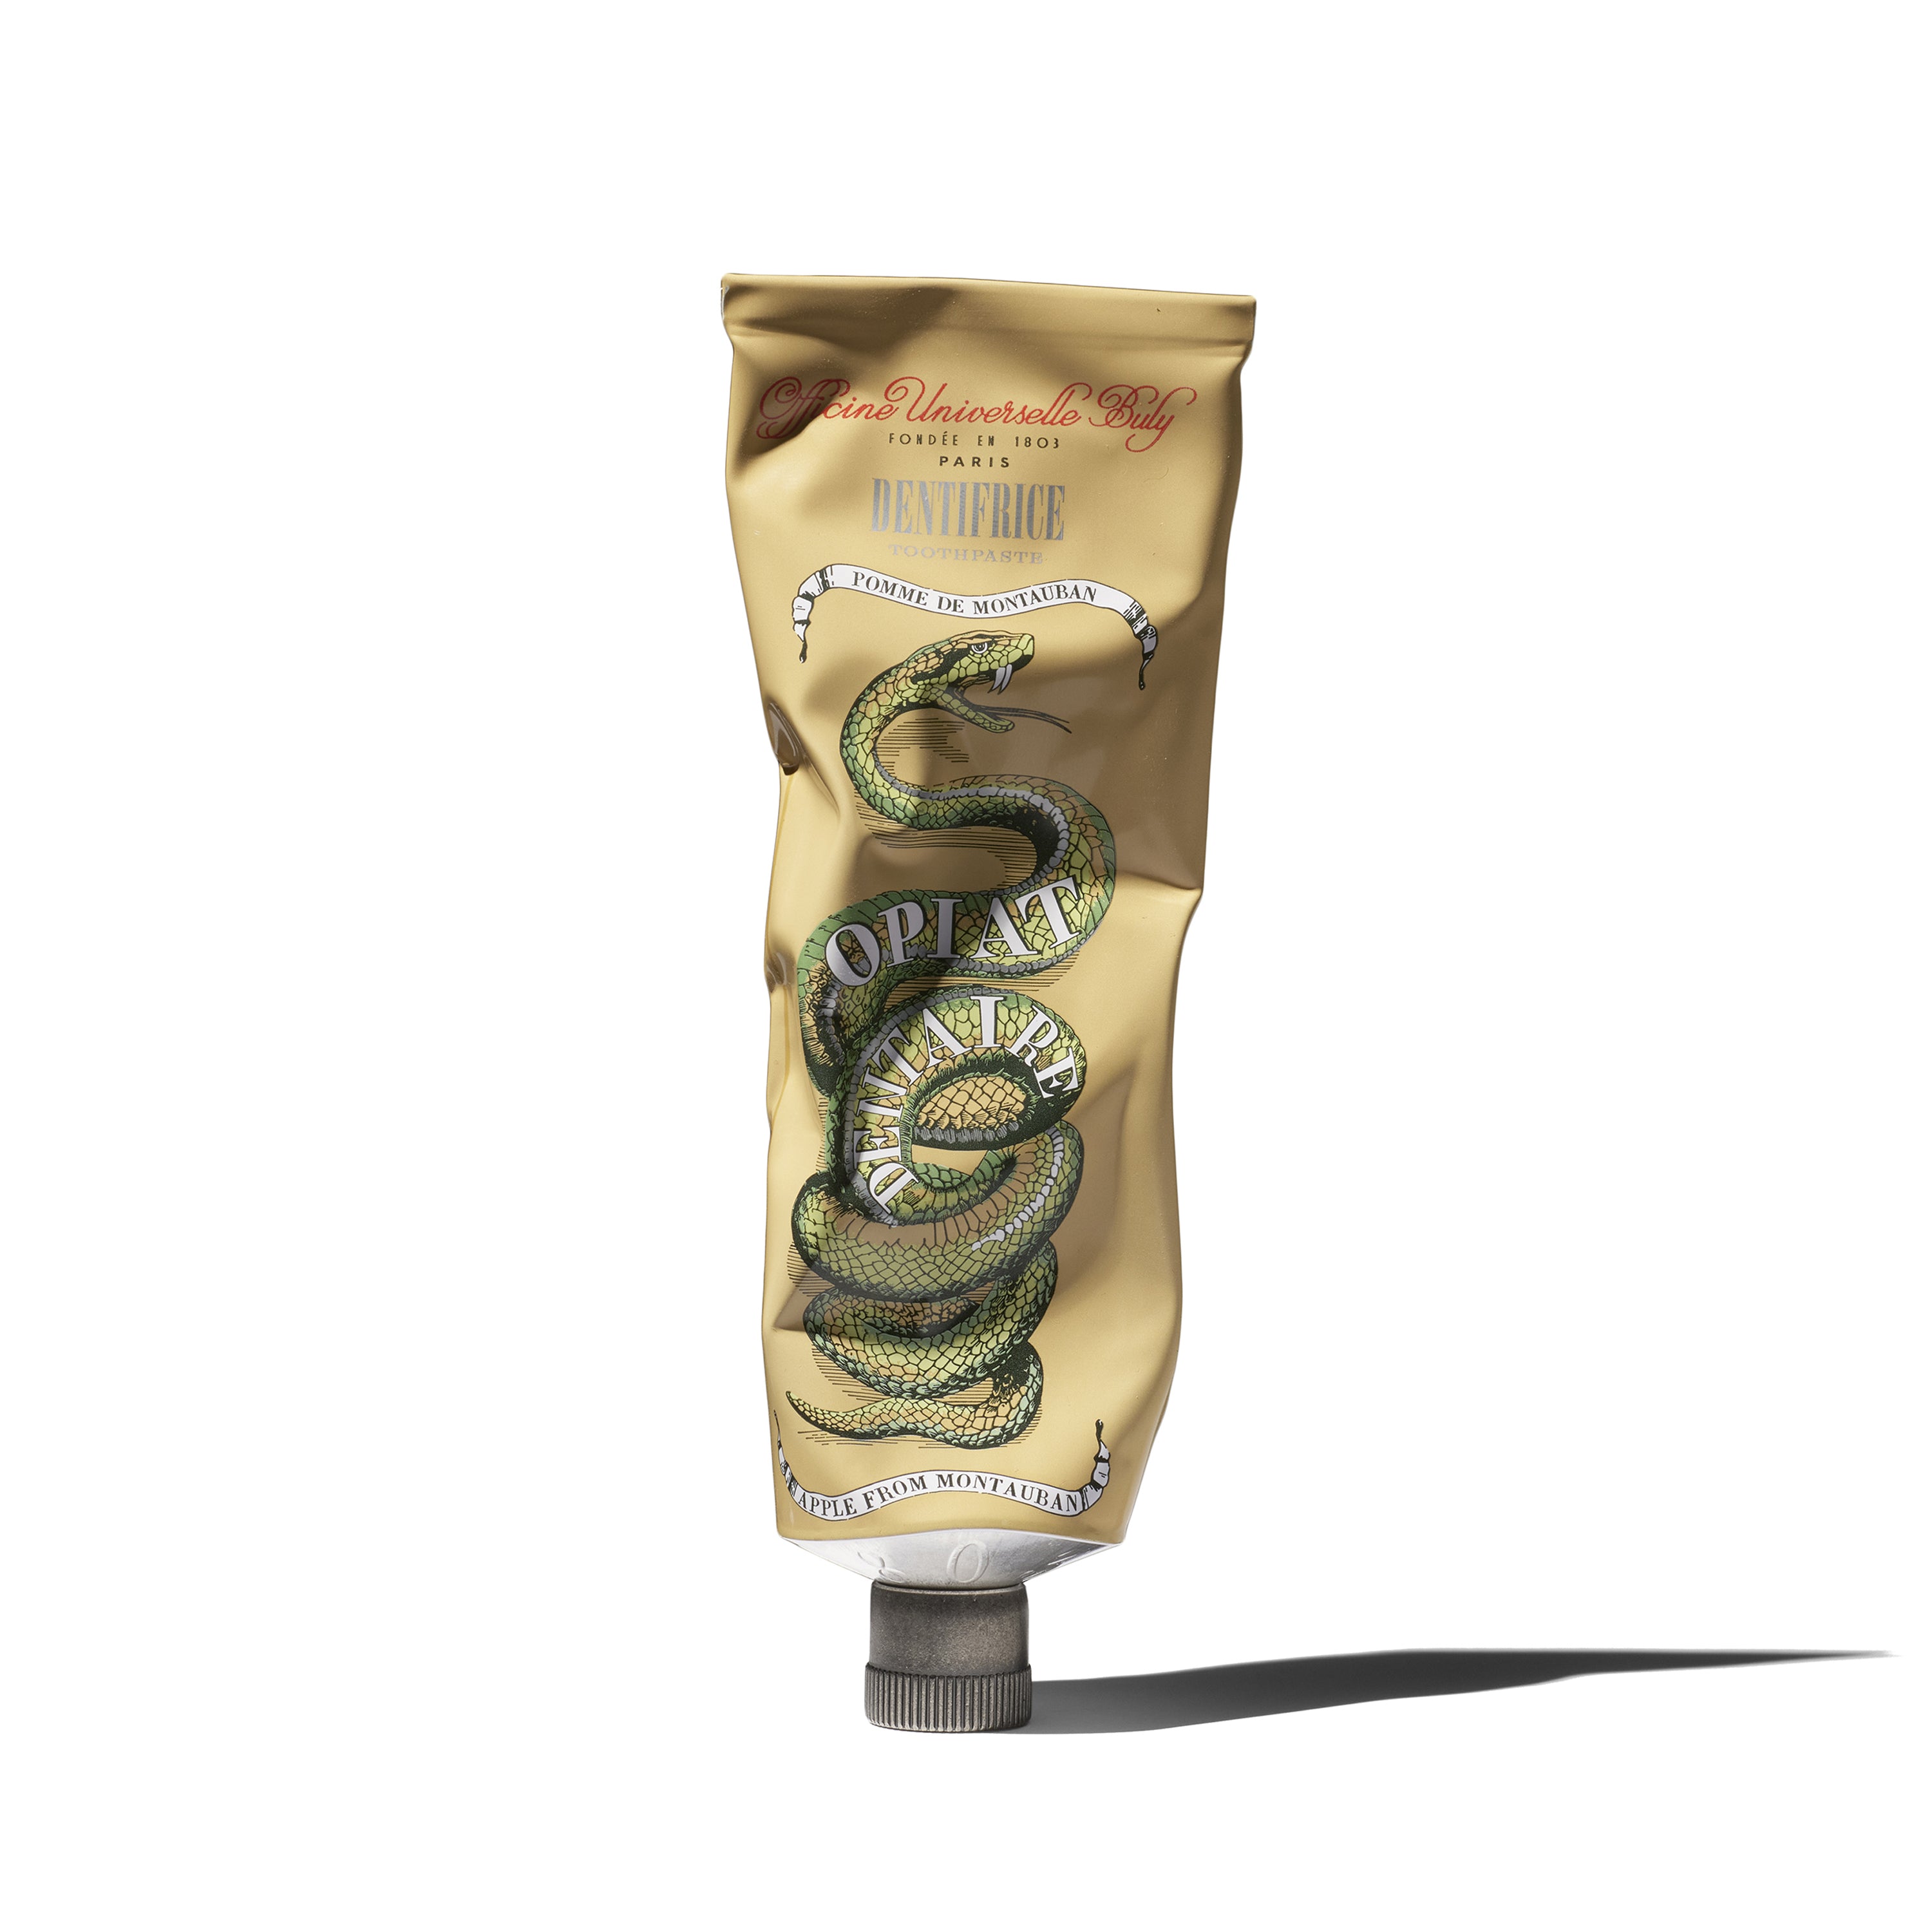 Buly 1803 - Opiat Dentaire Toothpaste, 75ml - Mint, Coriander And